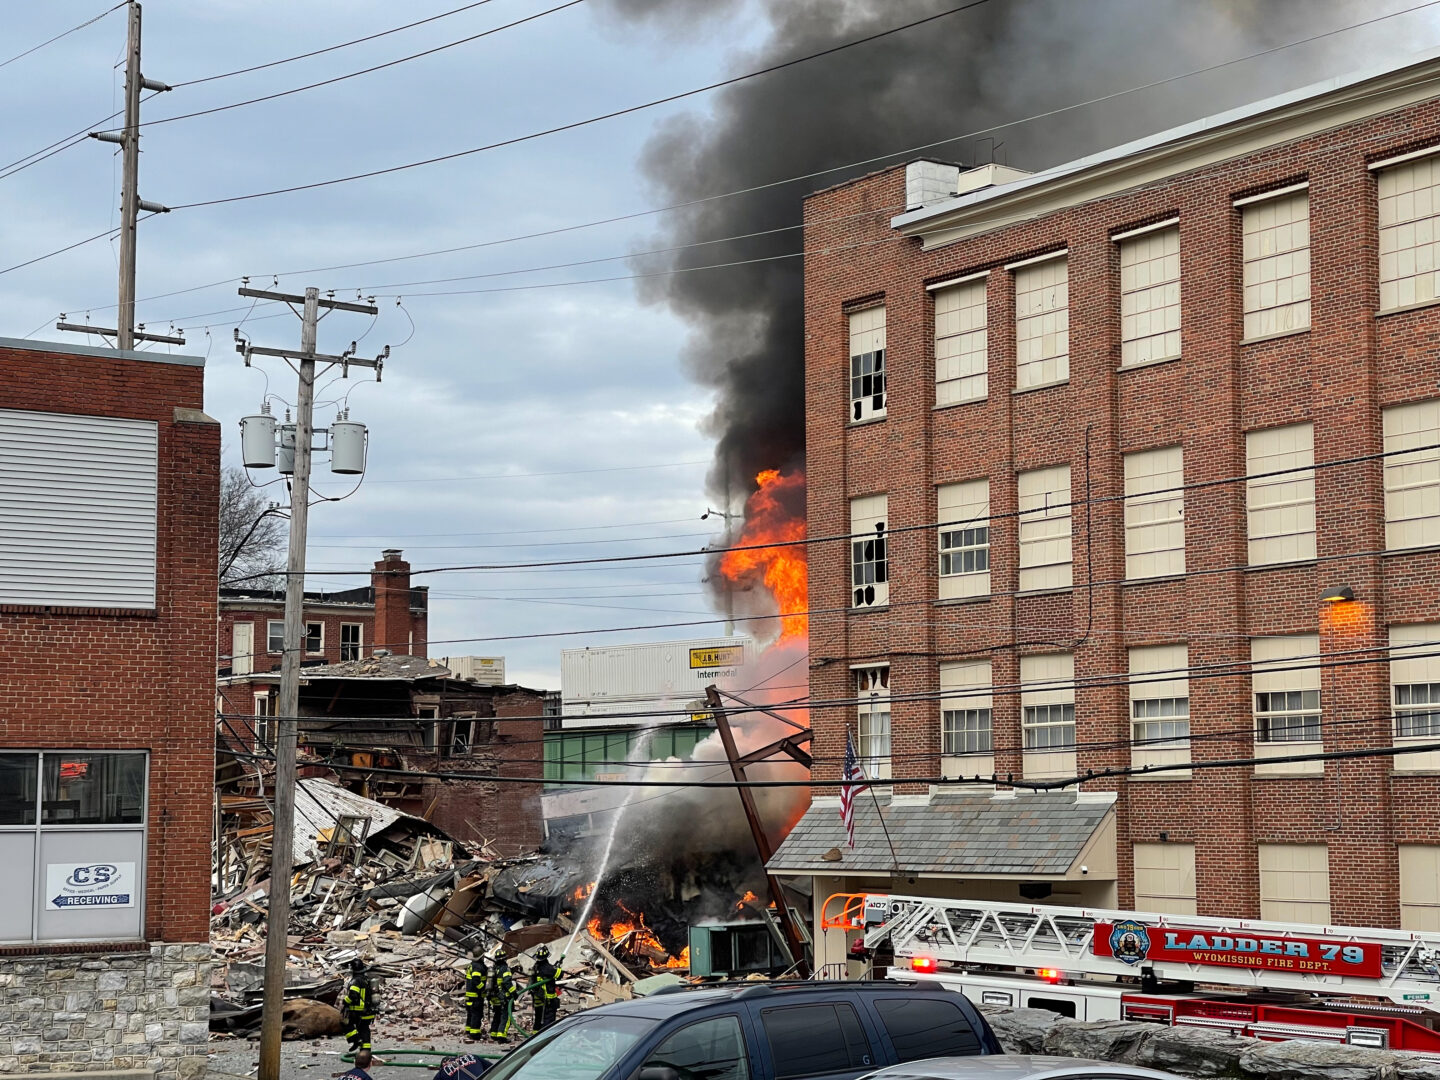 Emergency crews respond to R.M. Palmer Co. on March 24, 2023 after an explosion destroyed part of the candy factory. (Ben Hasty - in kind contribution)